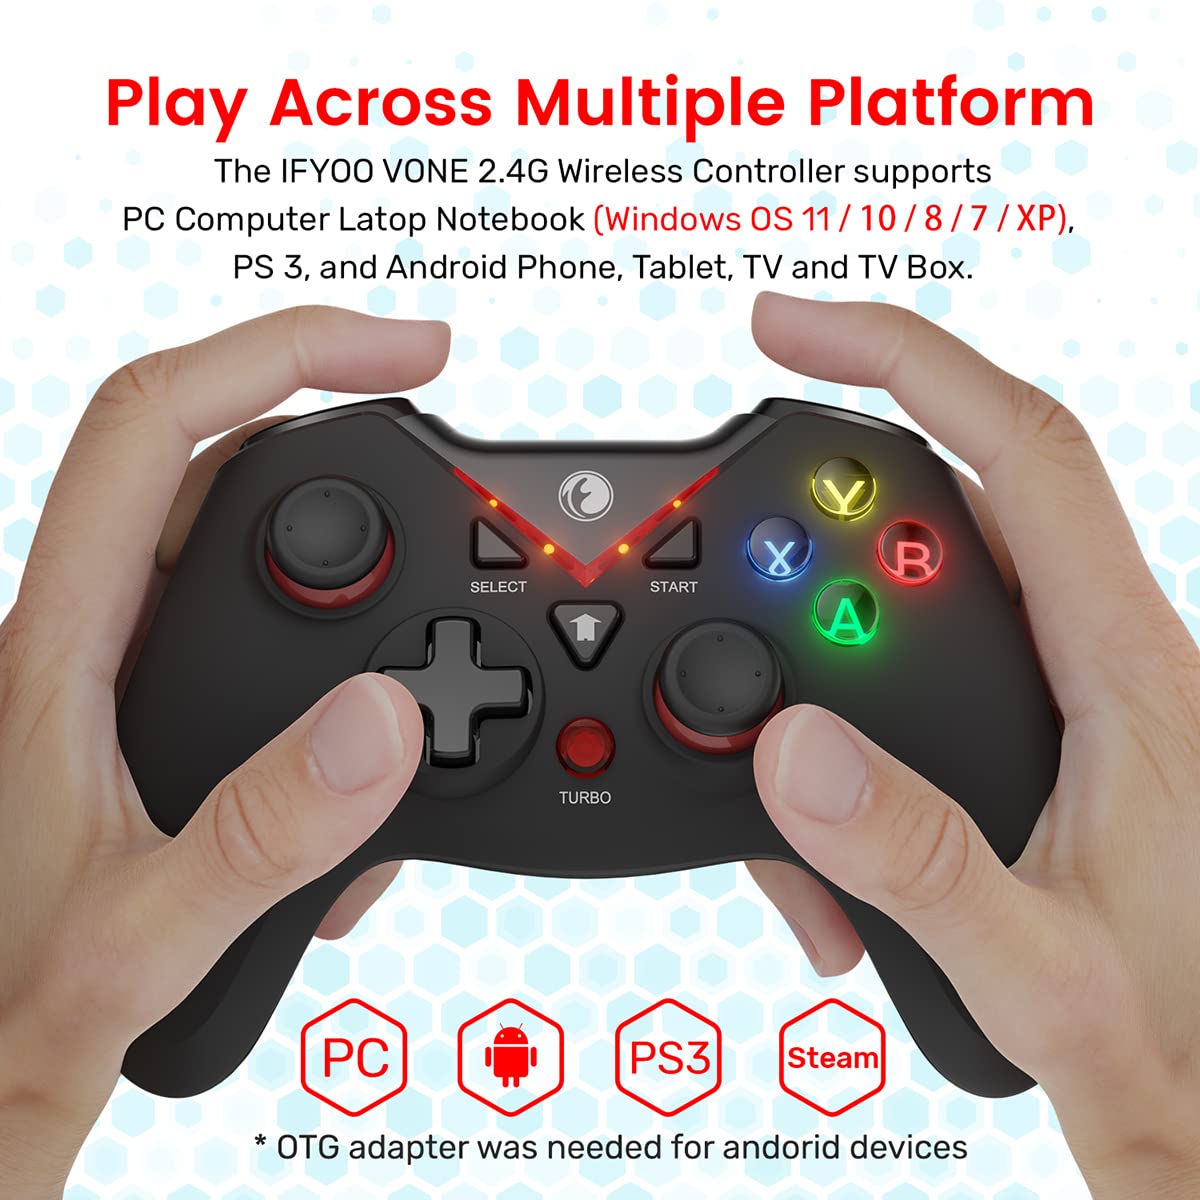 IFYOO VONE 2.4G Wireless Game Controller, Dual-Vibration Gaming Gamepad Joystick for PC Windows 11 10 8 7 Steam, PS3, Android Phone Tablet TV, Laptop Notebook Computer - Red, 2x White Joystick Caps